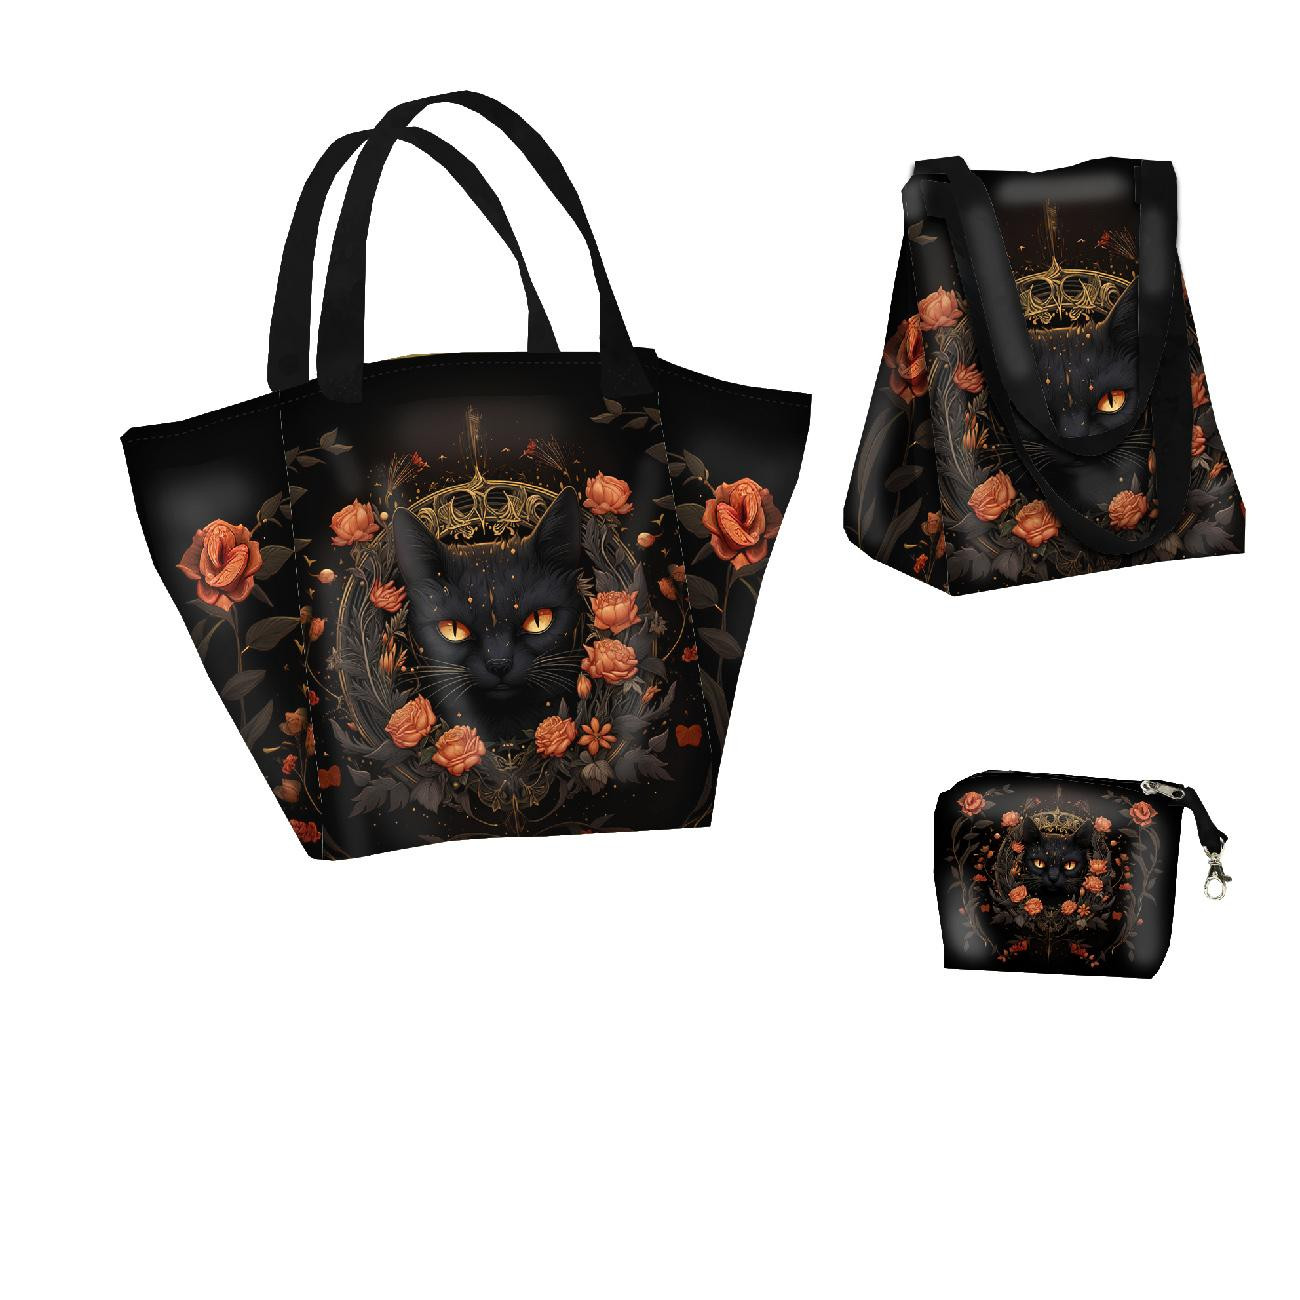 XL bag with in-bag pouch 2 in 1 - GOTHIC CAT - sewing set